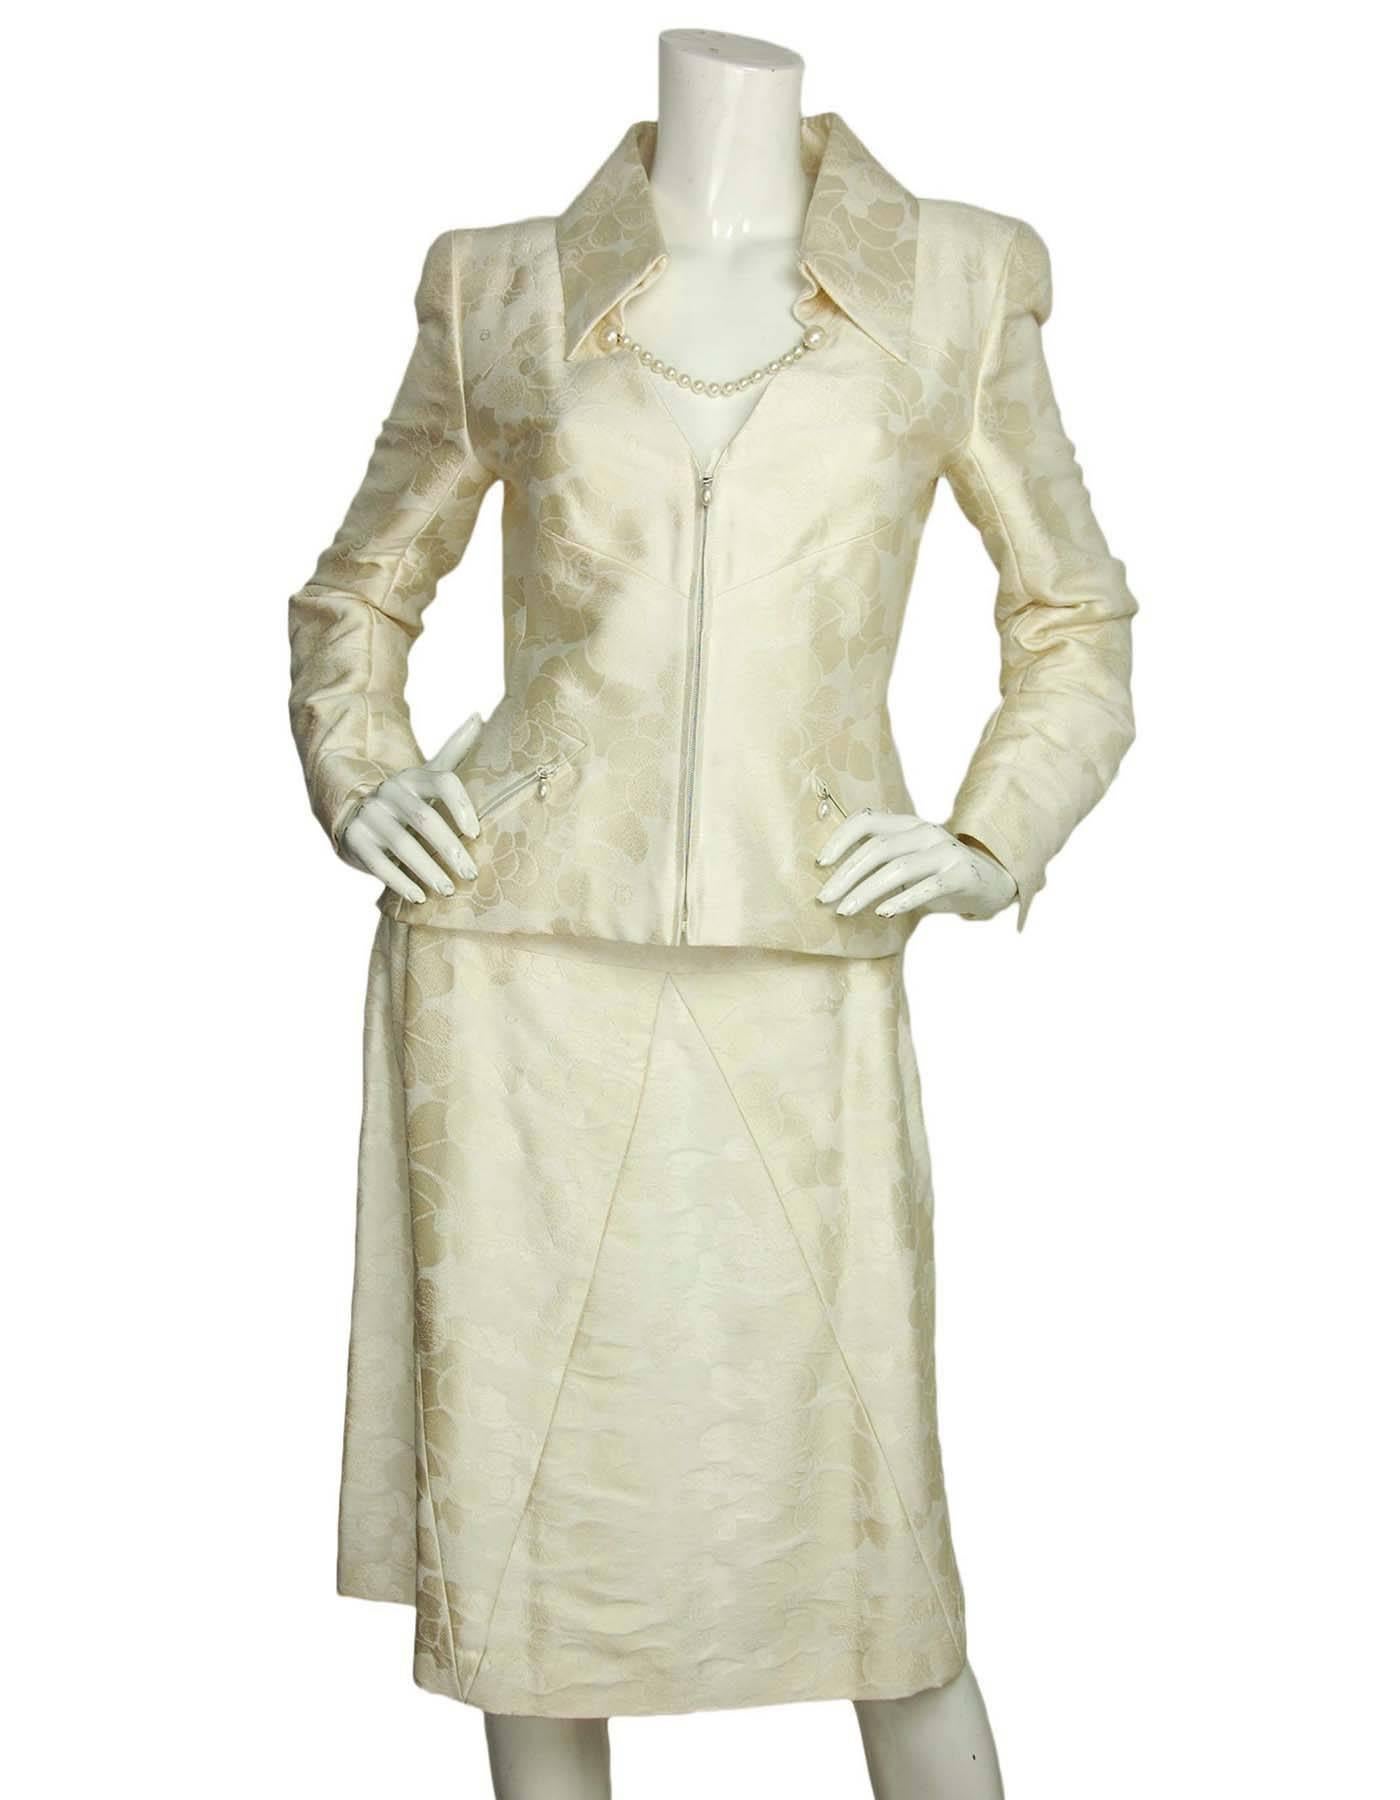 Chanel Cream Camelia Print Skirt Suit
Features faux pearls at pockets and strands that attach under collar with hook and eye closure

Made in: France
Year of Production: 2001
Color: Cream
Materials: 48% cotton, 28% rayon, 24% silk
Lining: 100%